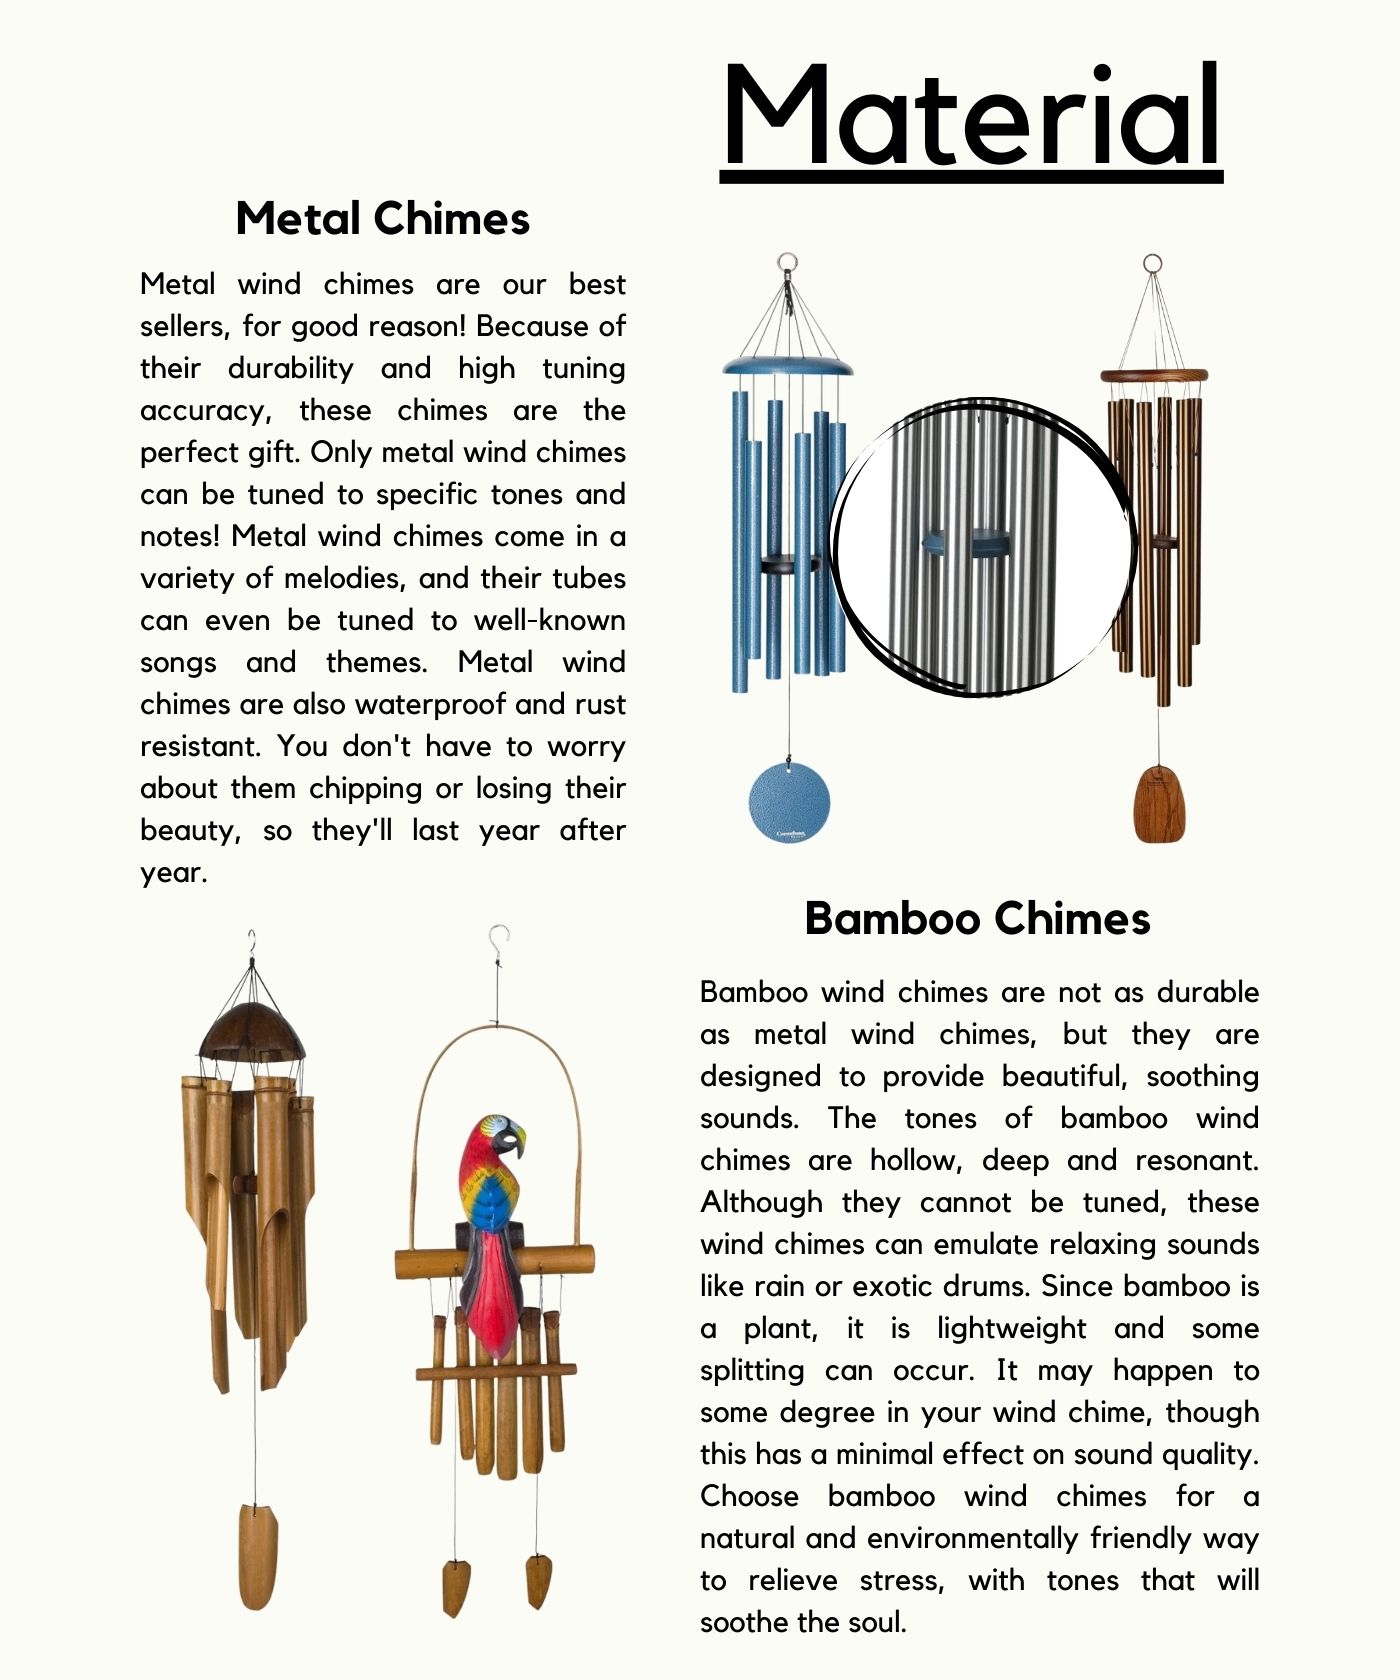 Material Metal Chimes Metal wind chimes are our best sellers, for good reason! Because of their durability and high tuning accuracy, these chimes are the perfect gift. Only metal wind chimes can be tuned to specific tones and notes! Metal wind chimes come in a variety of melodies, and their tubes can even be tuned to well-known songs and themes. Metal wind chimes are also waterproof and rust resistant. You don't have to worry about them chipping or losing their beauty, so they'll last year after year. Bamboo Chimes Bamboo wind chimes are not as durable as metal wind chimes, but they are designed to provide beautiful, soothing sounds. The tones of bamboo wind chimes are hollow, deep and resonant. Although they cannot be tuned, these wind chimes can emulate relaxing sounds like rain or exotic drums. Since bamboo is a plant, it is lightweight and some splitting can occur. It may happen to some degree in your wind chime, though this has a minimal effect on sound quality. Choose bamboo wind chimes for a natural and environmentally friendly way to relieve stress, with tones that will soothe the soul.